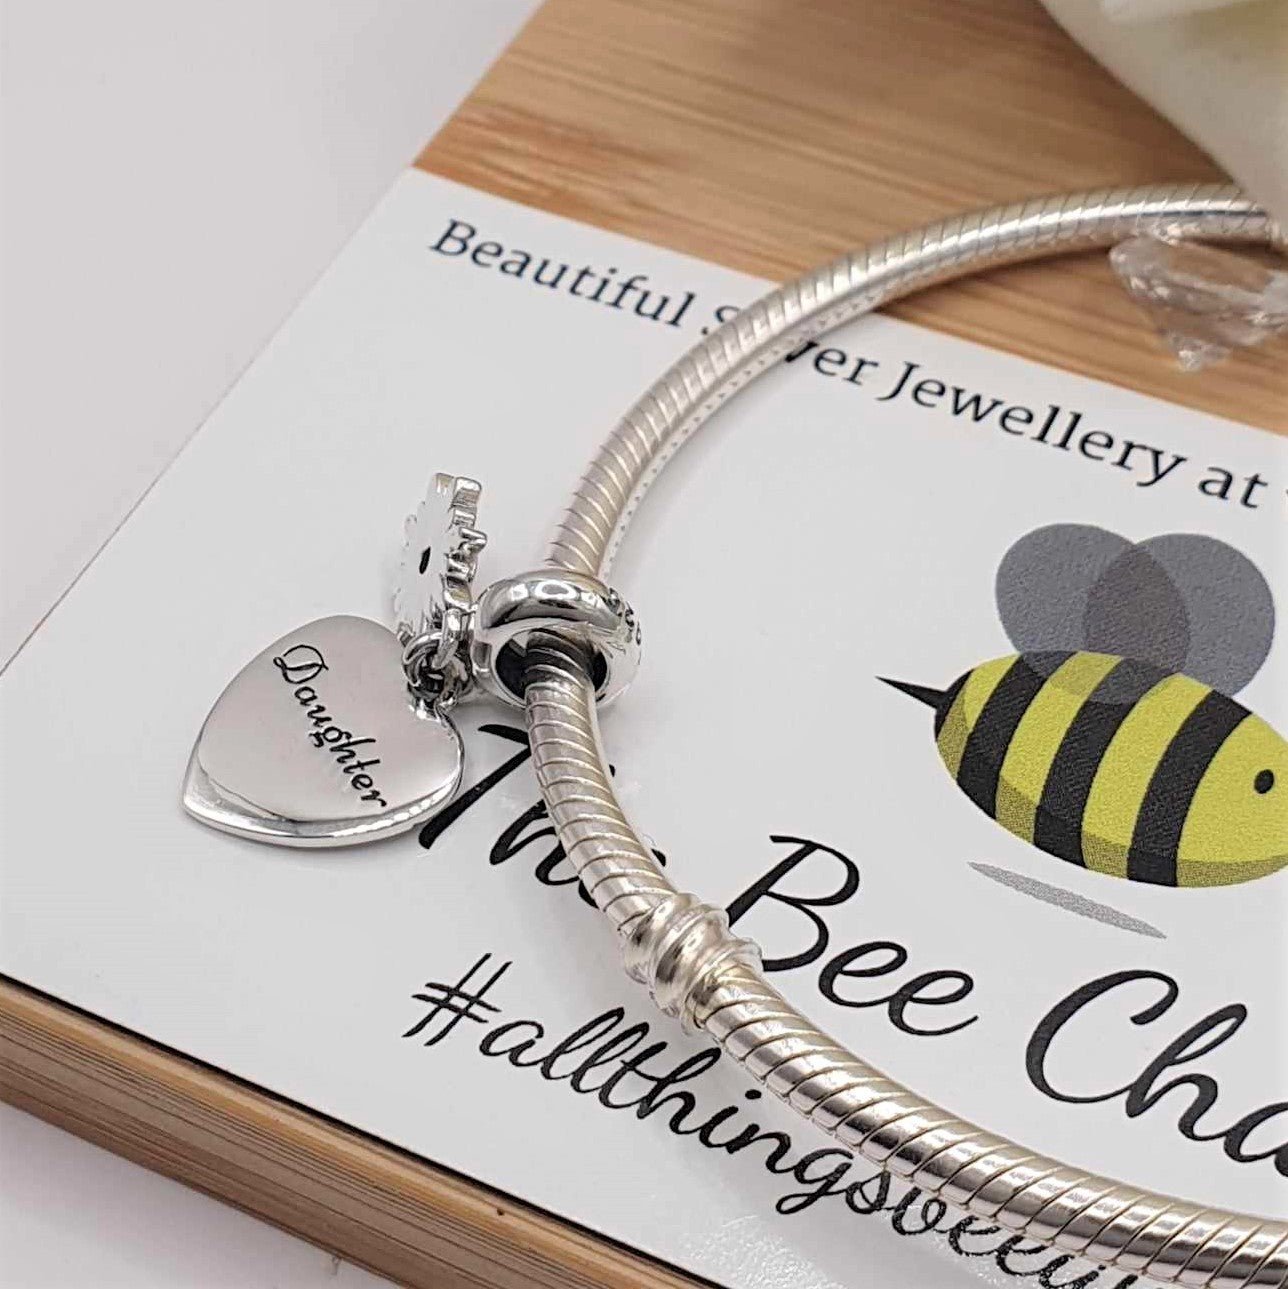 Daughter Charm - The Bee Charm